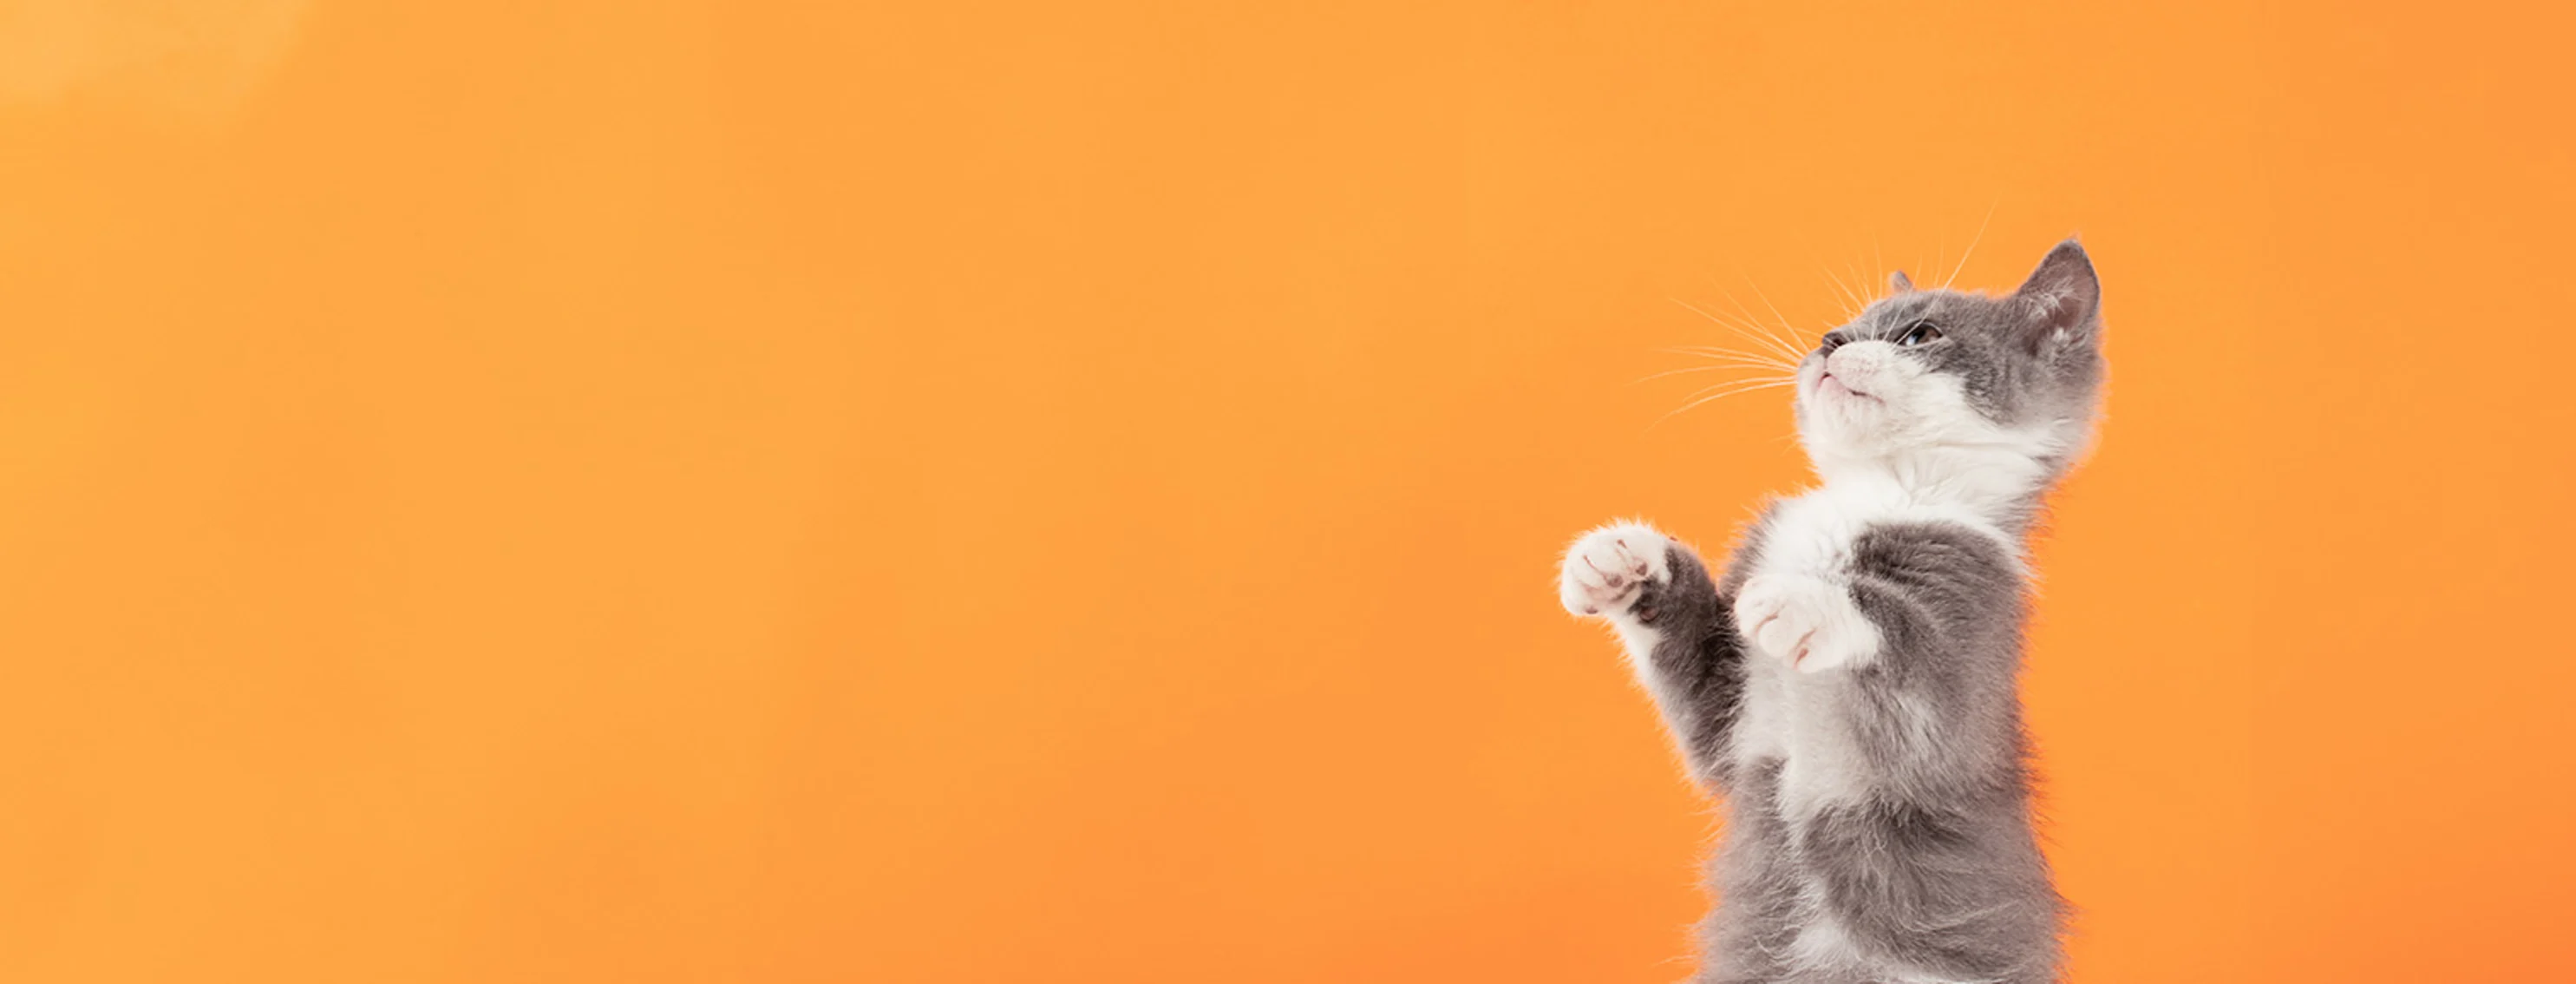 A grey kitten playing in front of an orange backdrop